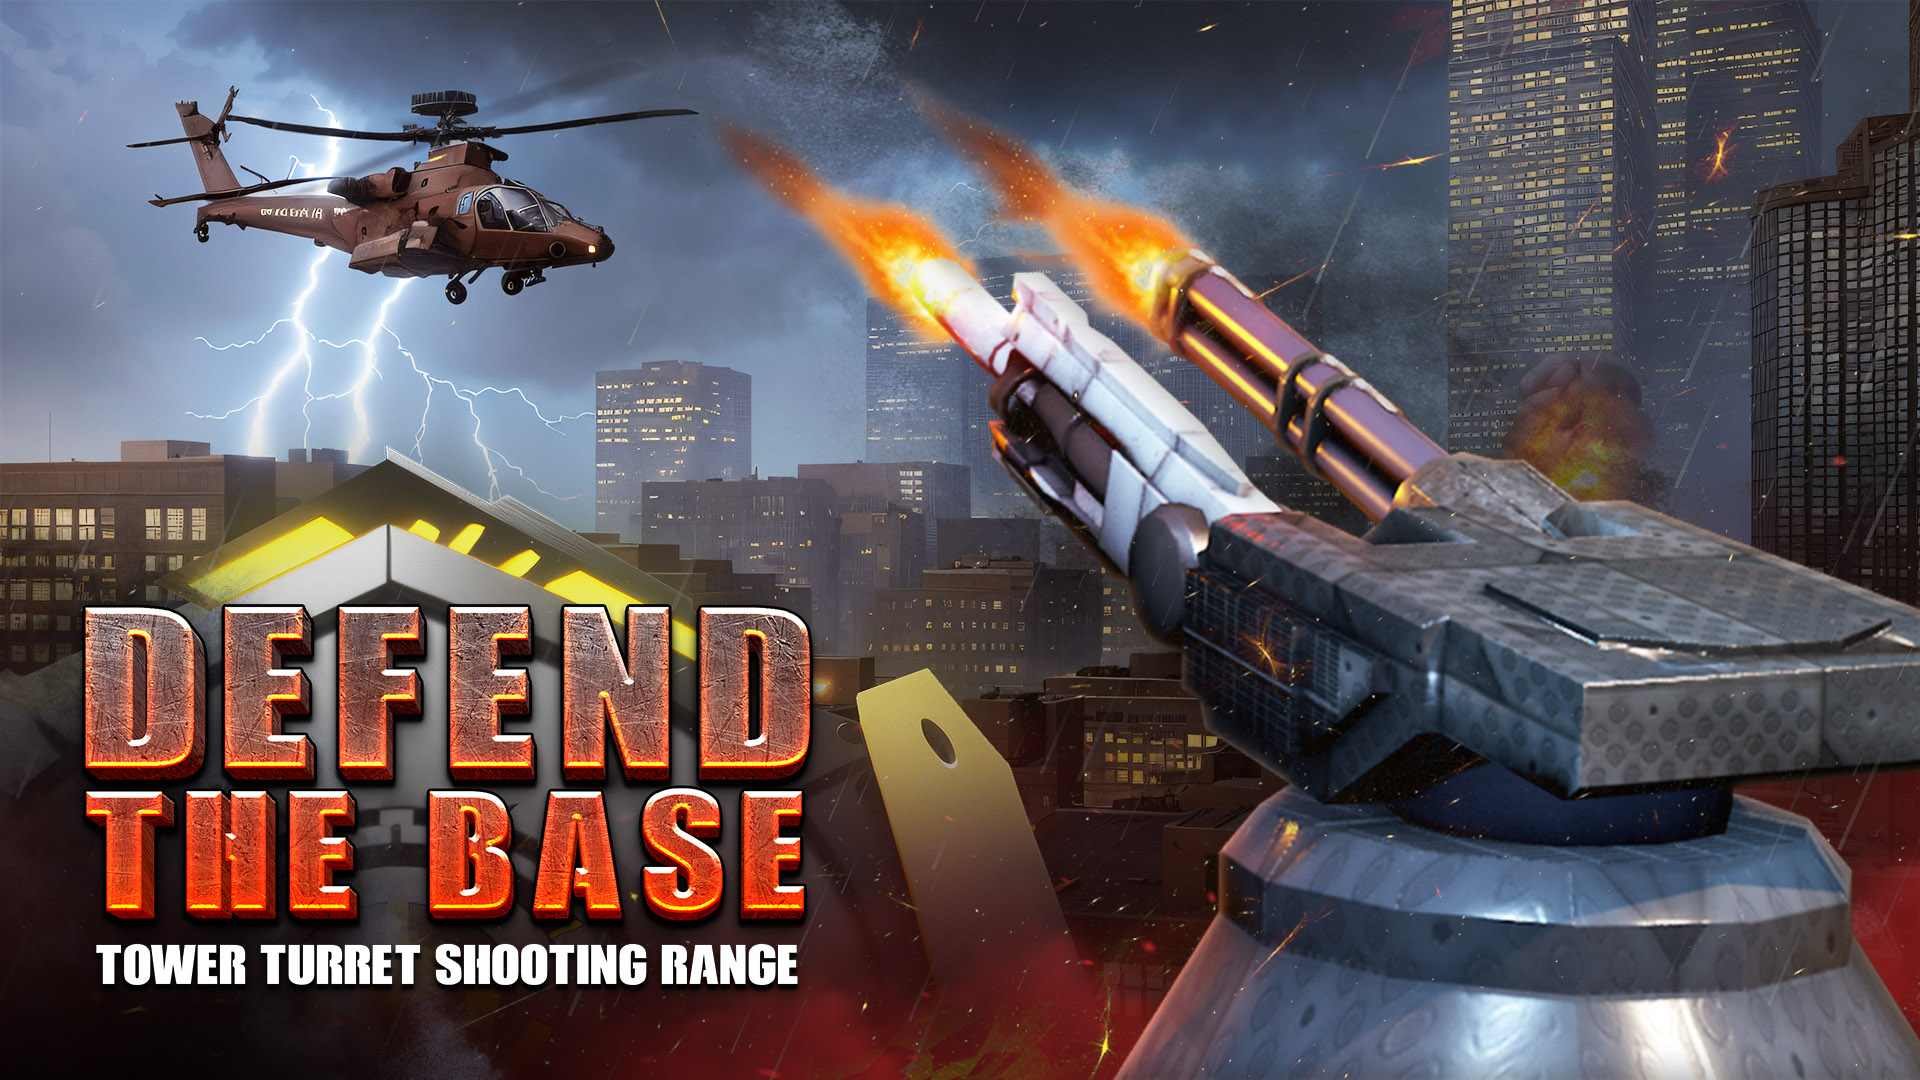 Defend The Base: Tower Turret Shooting Range